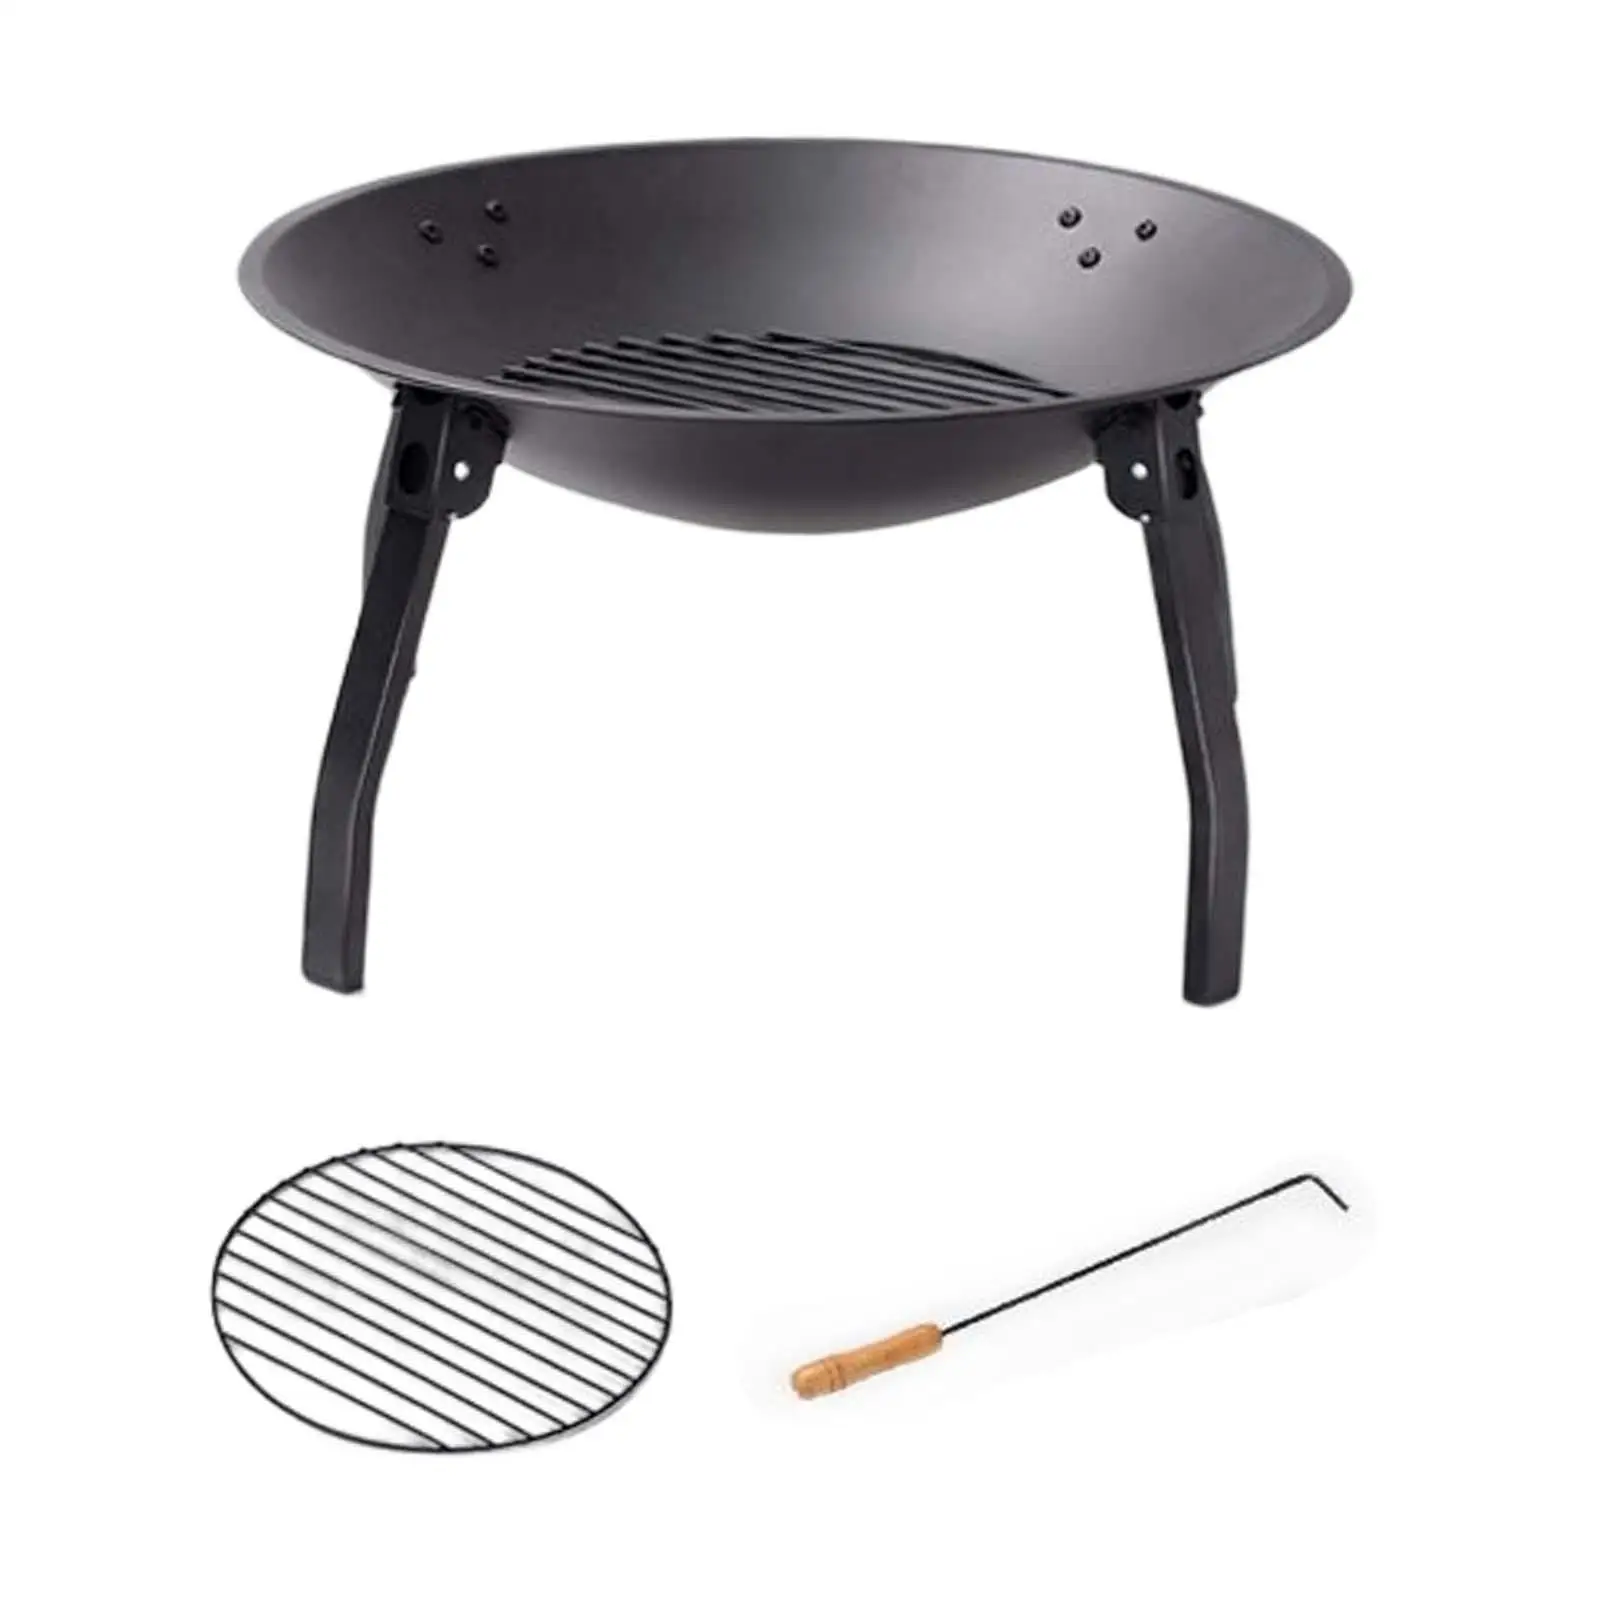 

Metal Outside Brazier Foldable Kitchenware Firepit Cooking Utensil Garden Fireplace for Backyard Outdoor Barbecue Deck